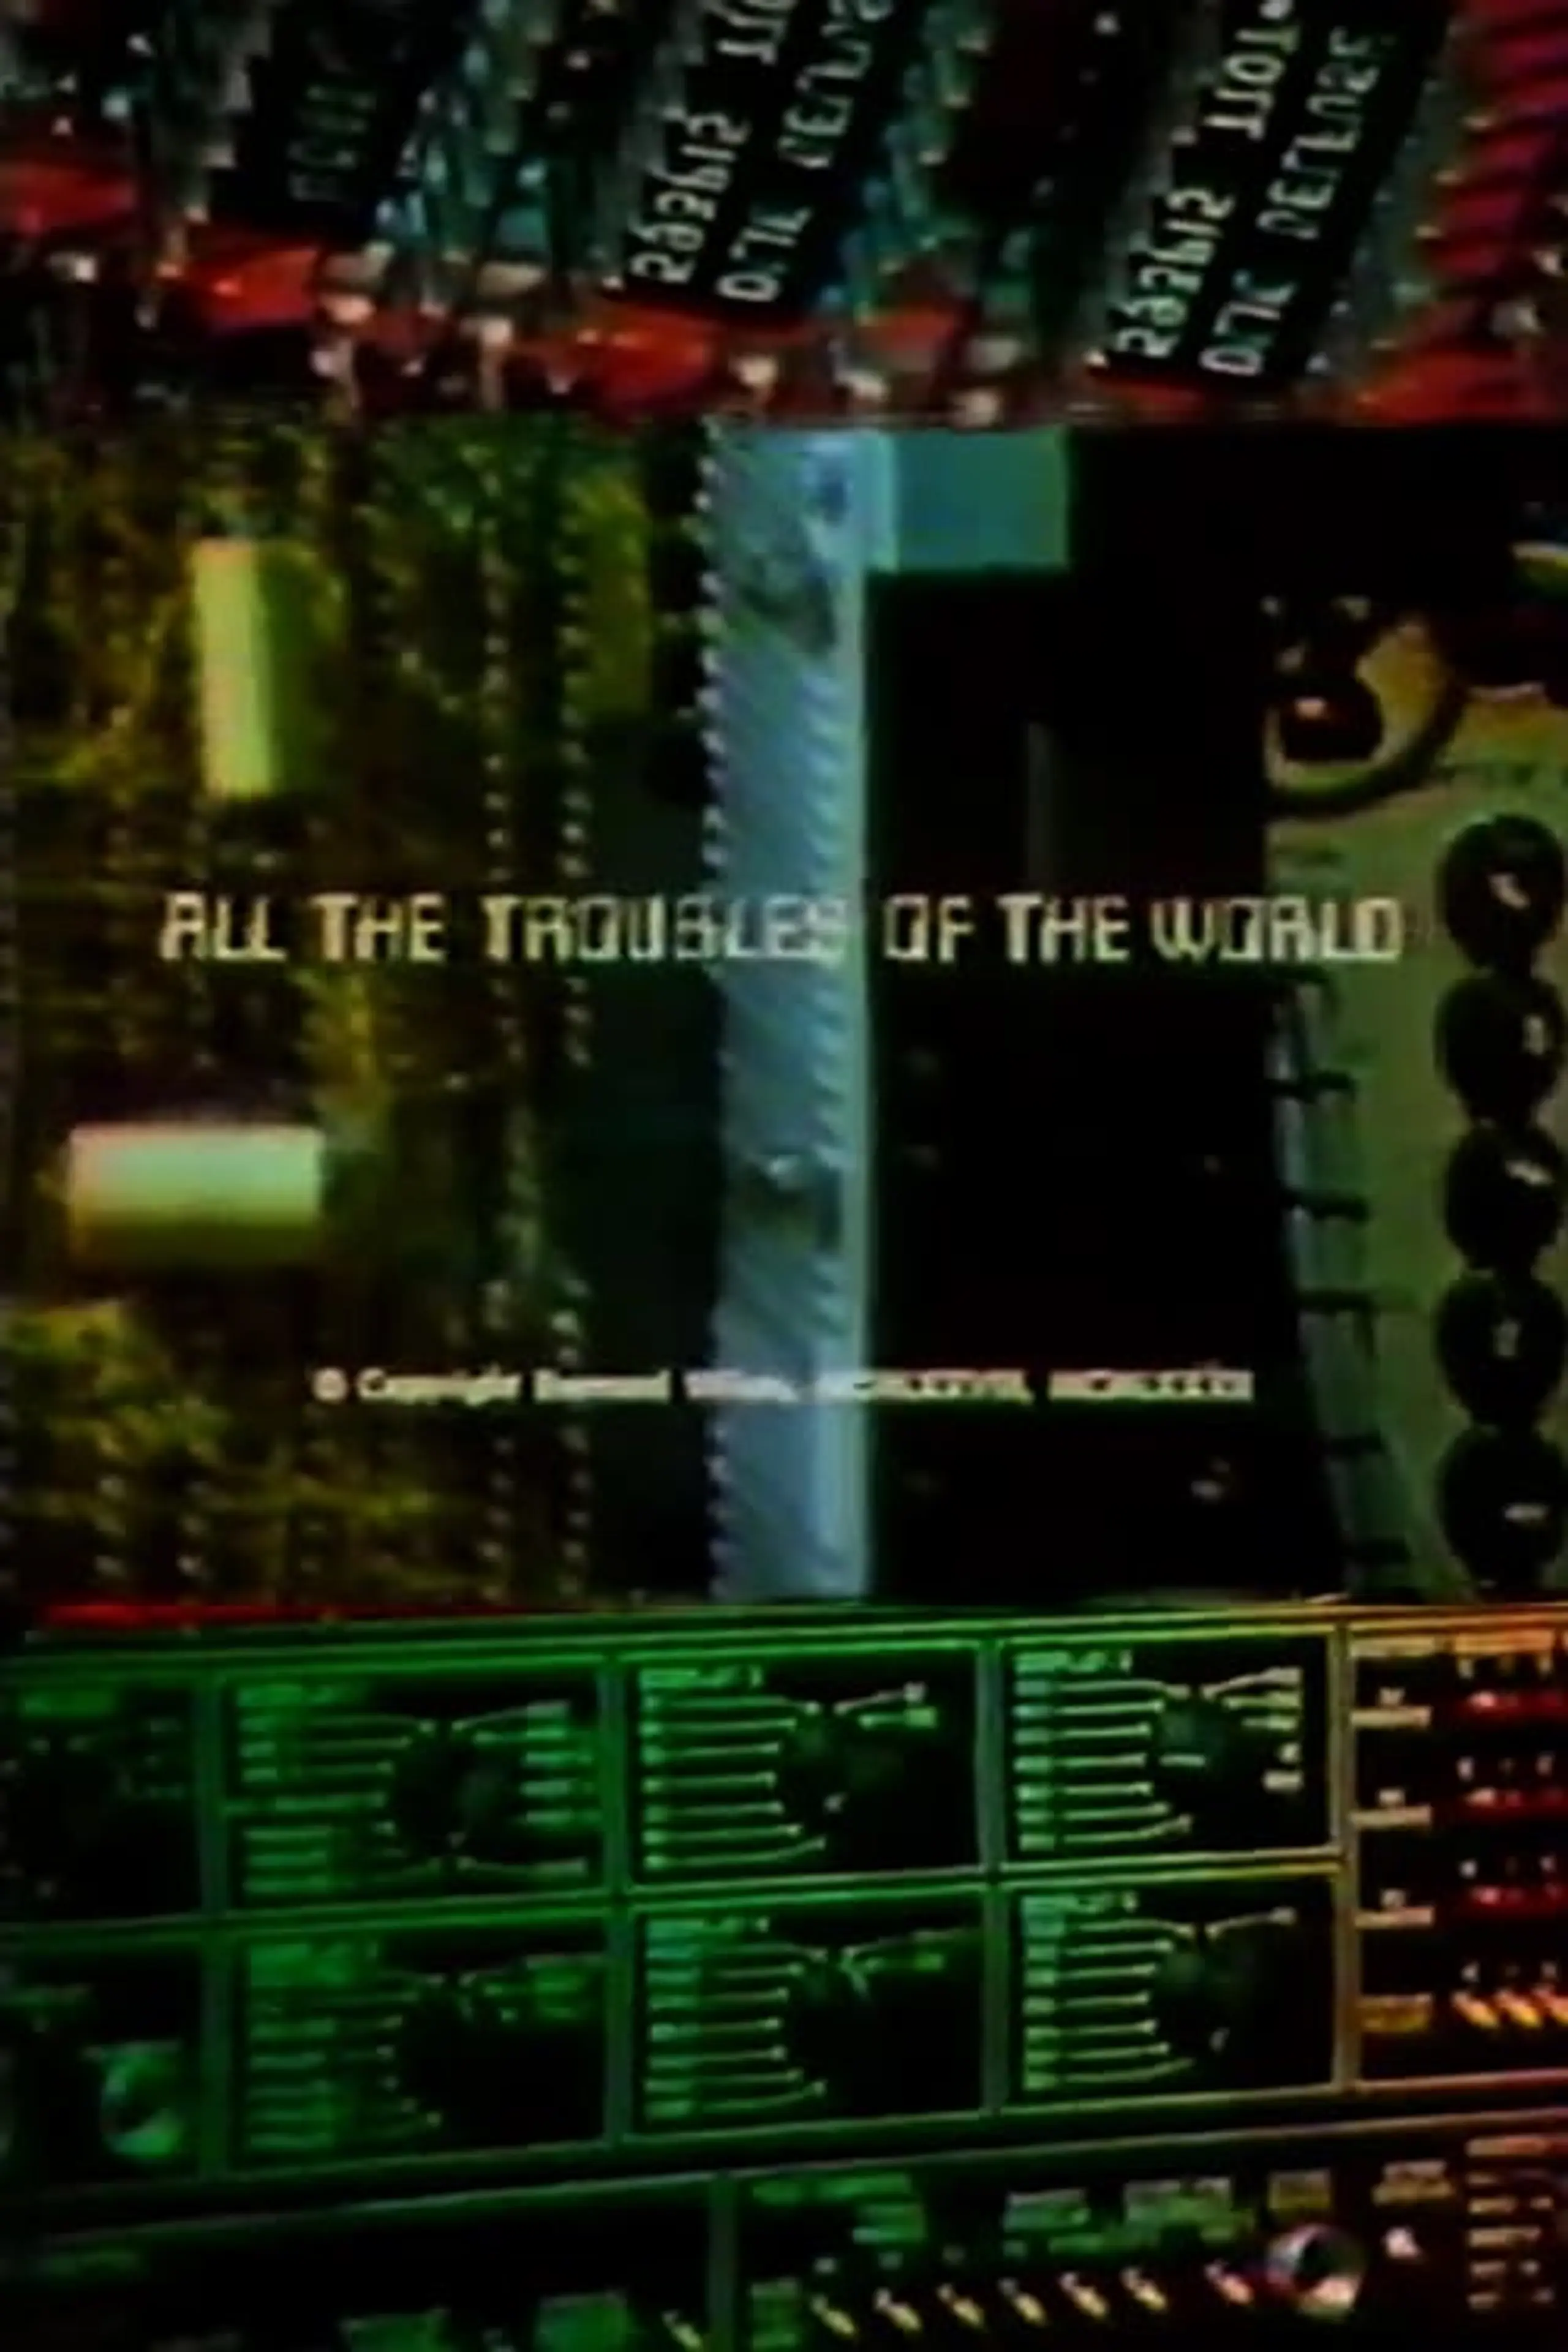 All the Troubles of the World